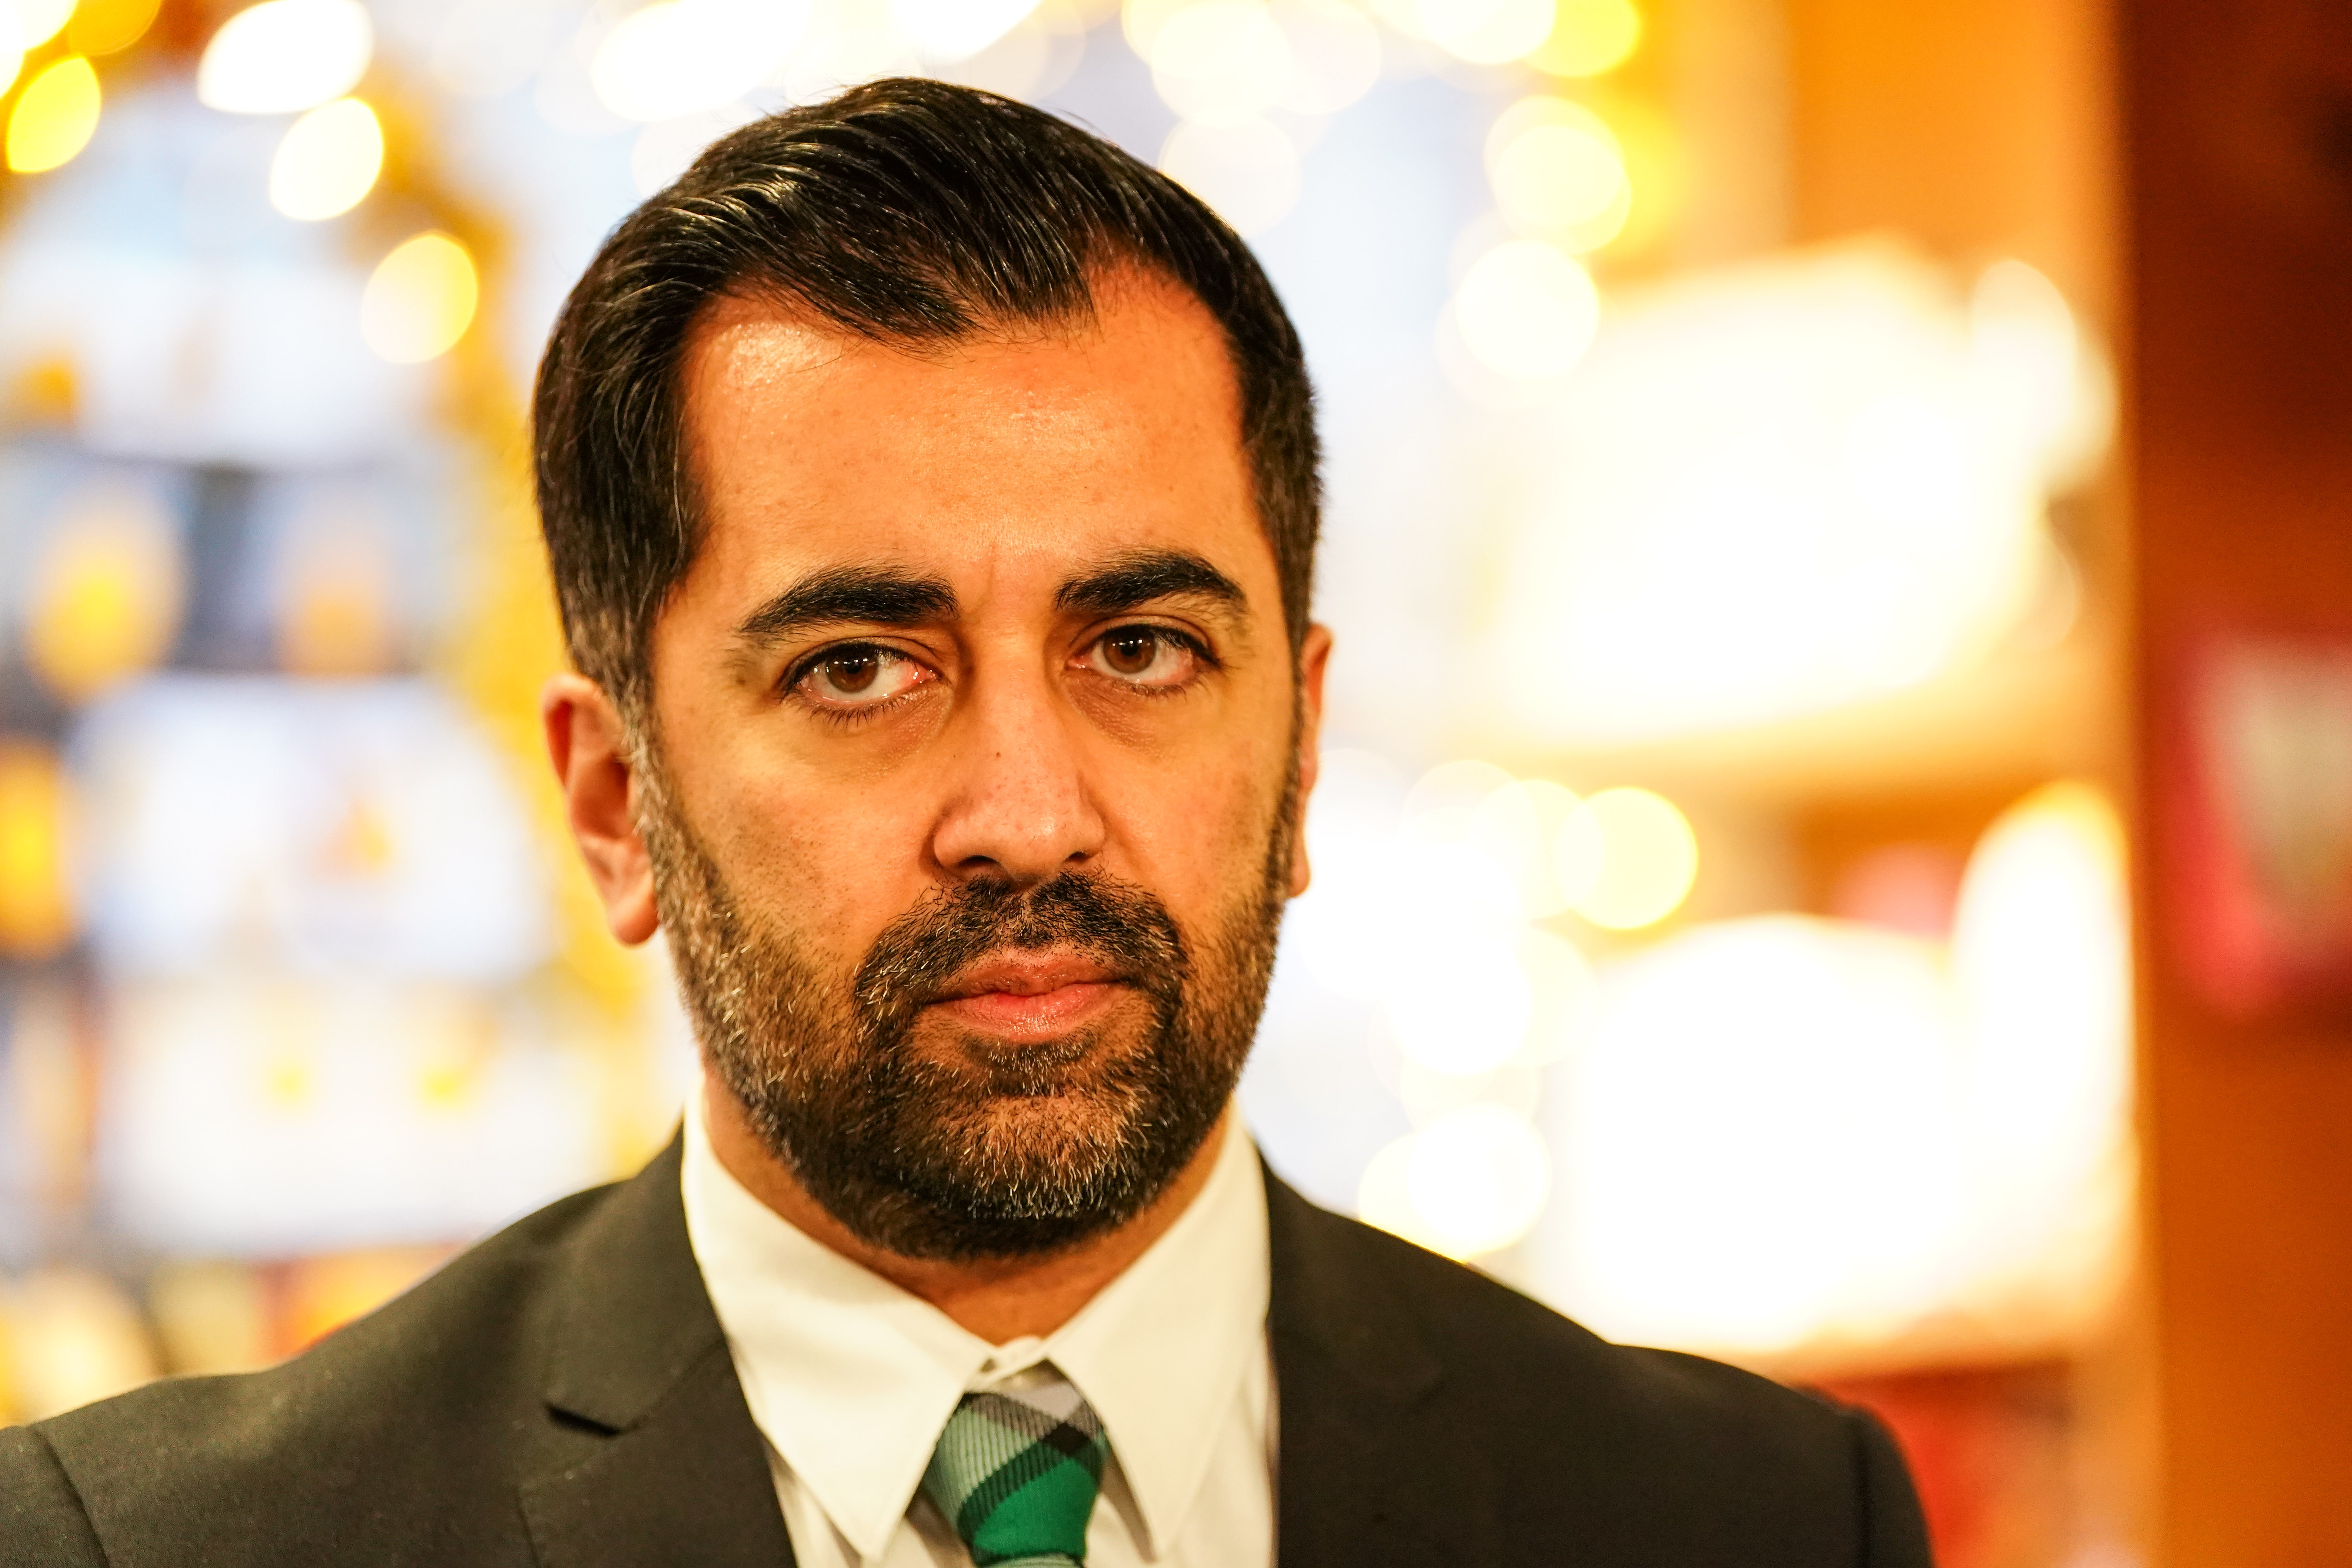 Humza Yousaf said social media had brought with it a rise in 'hate preachers'.